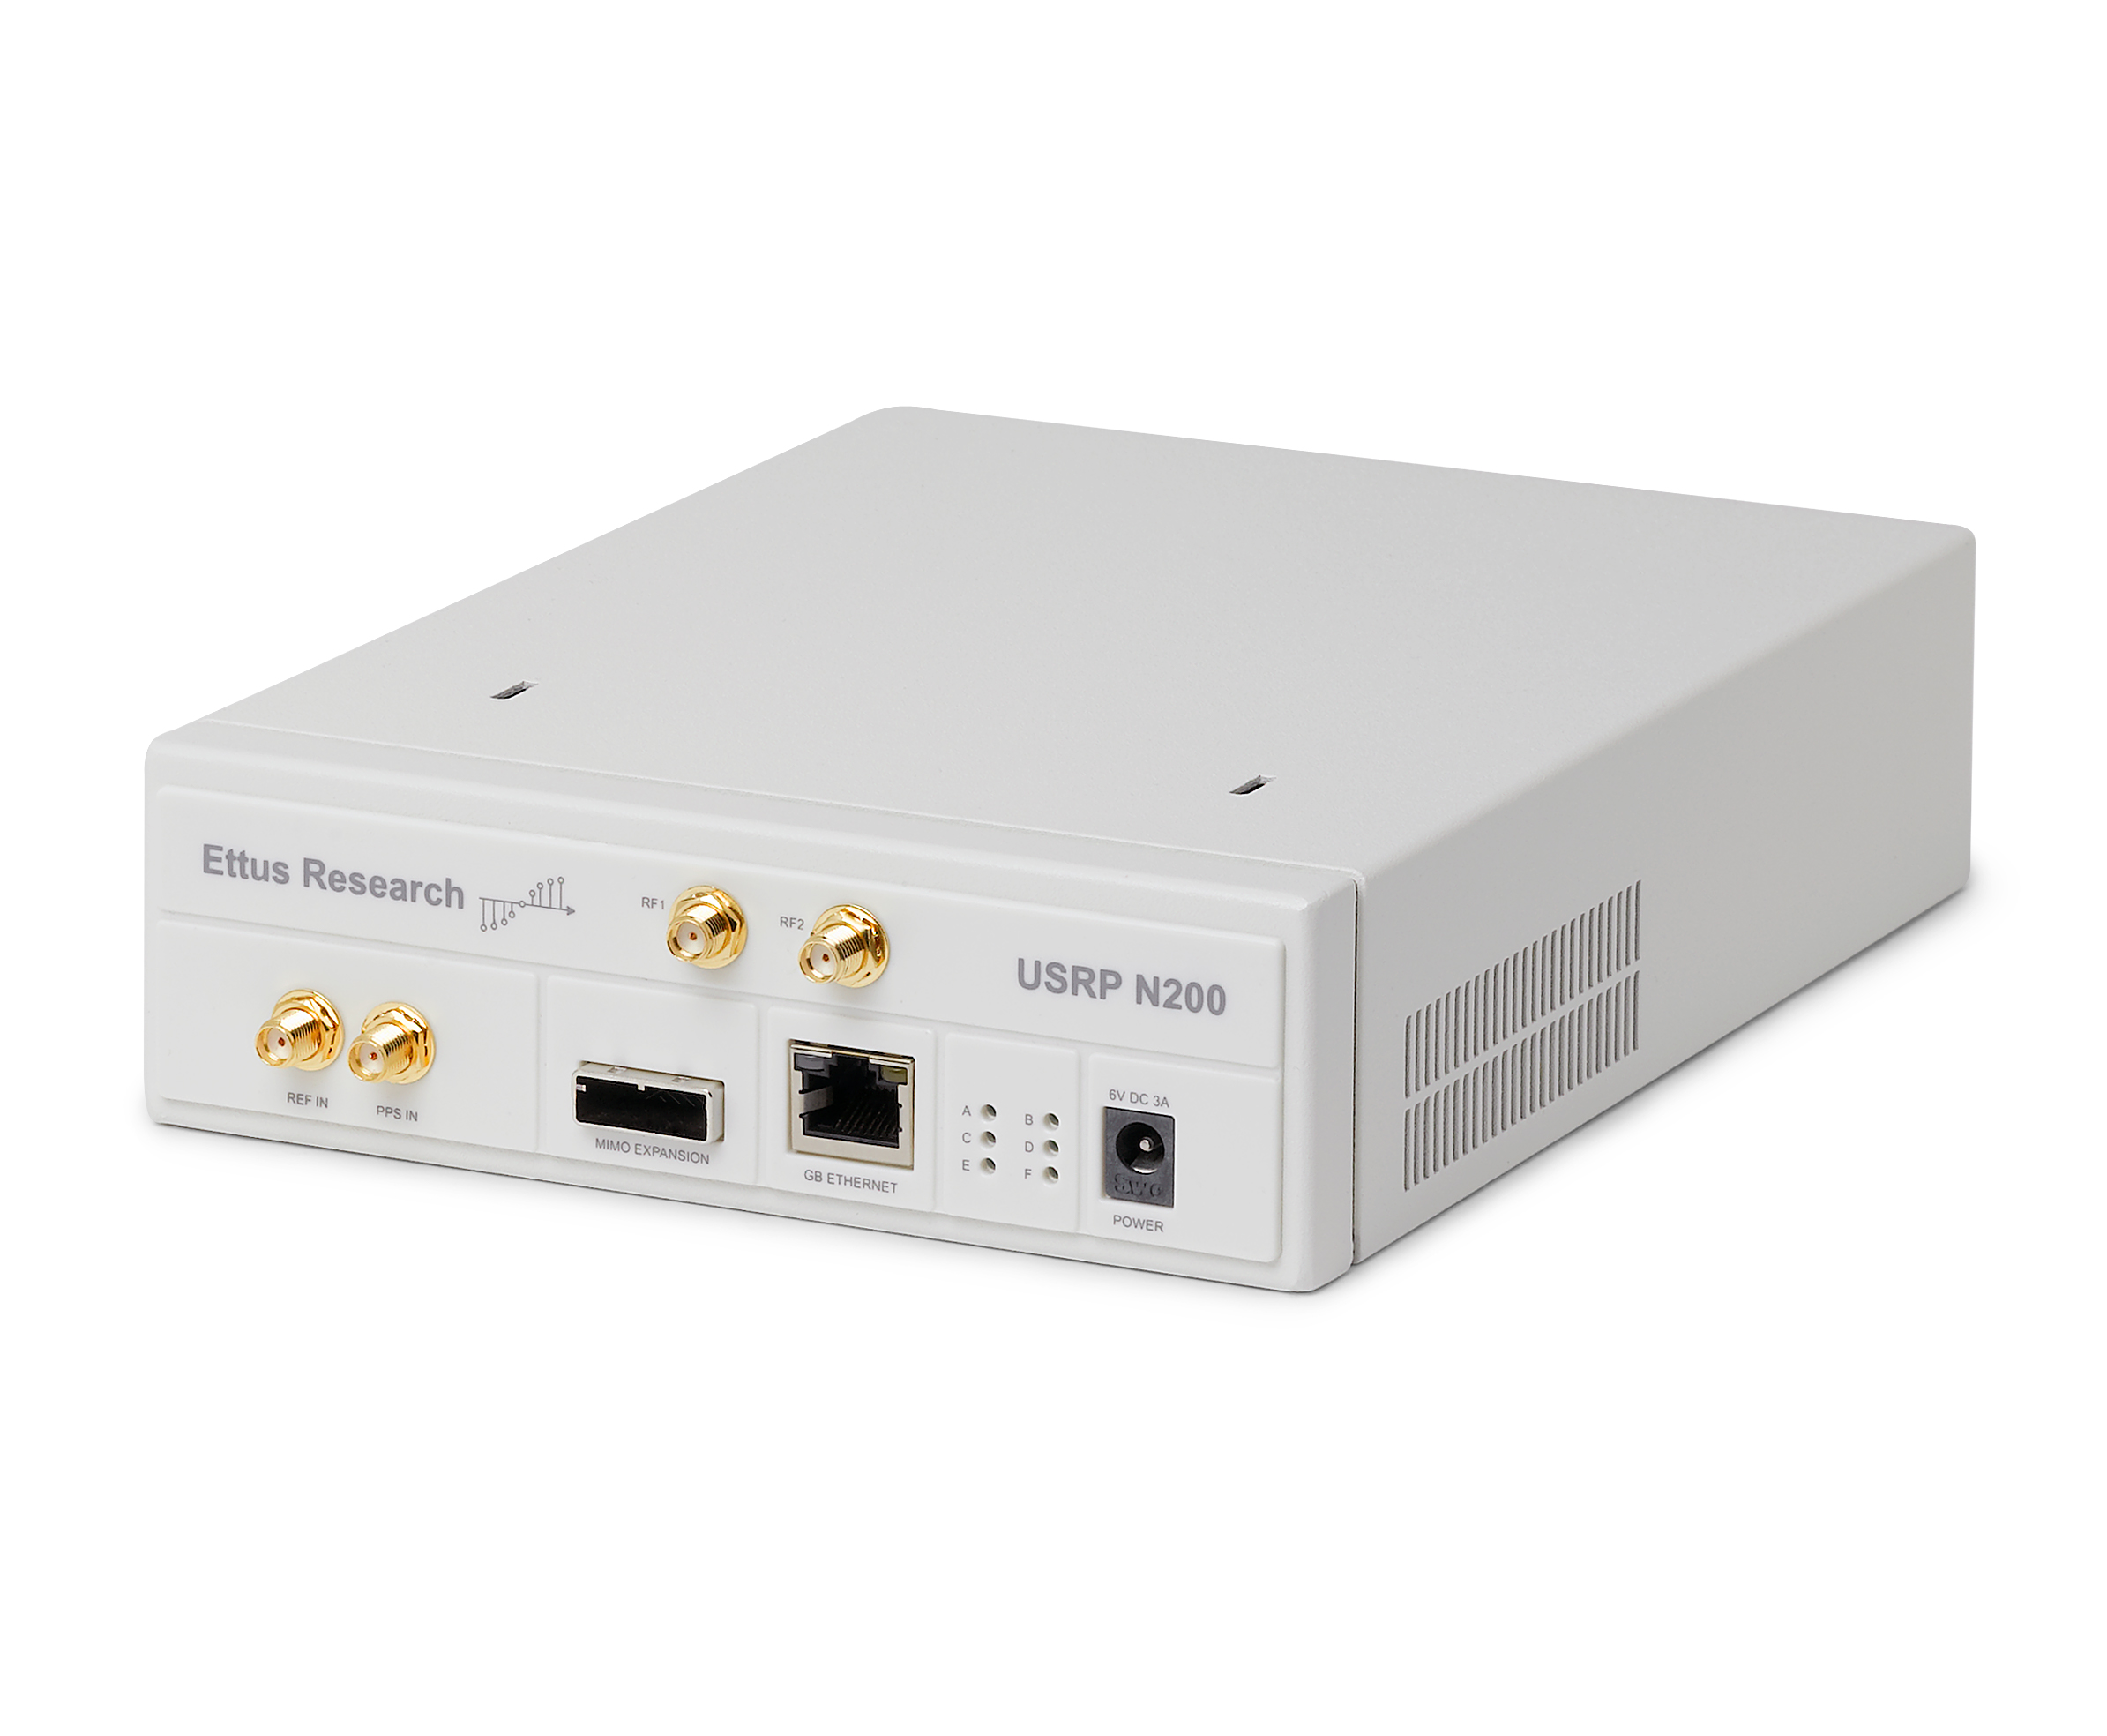 Product - USRP N200